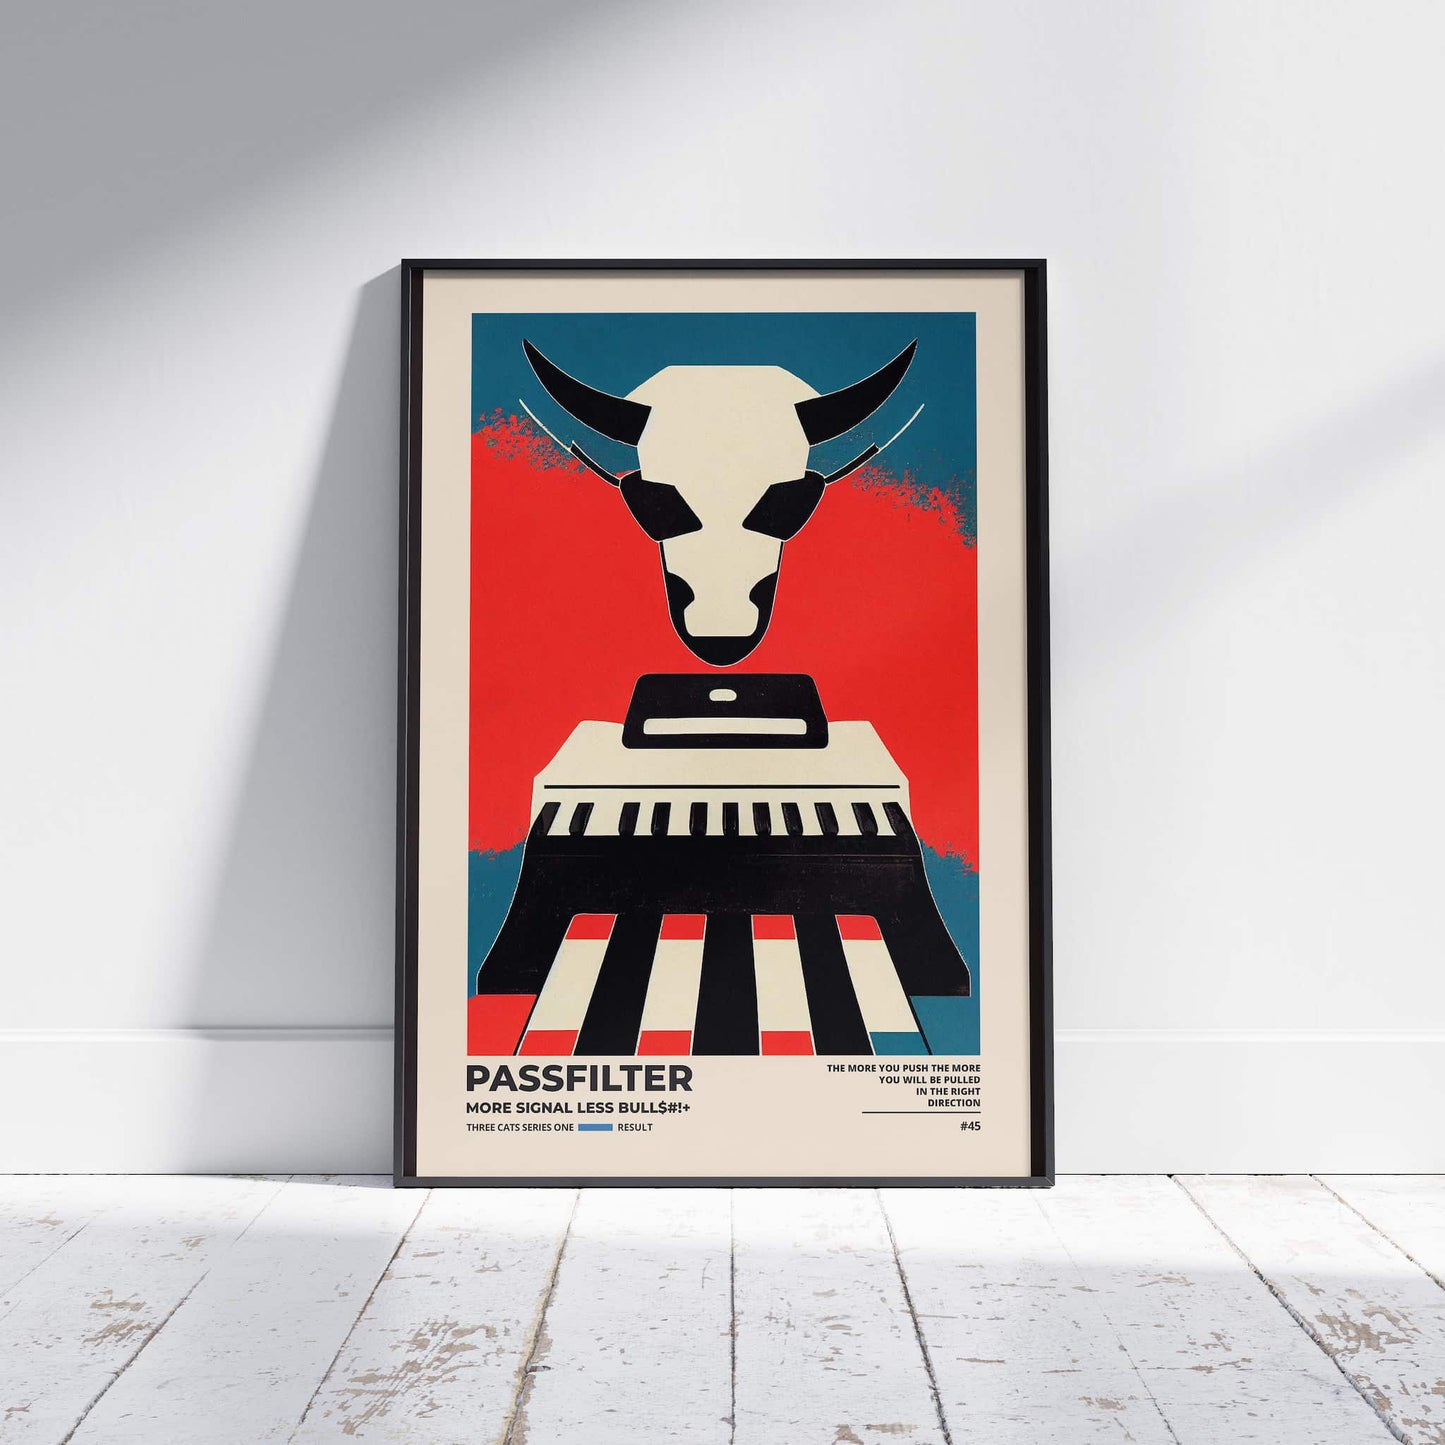 Black framed Passfilter poster sitting on a white wooden floor in a recording studio.